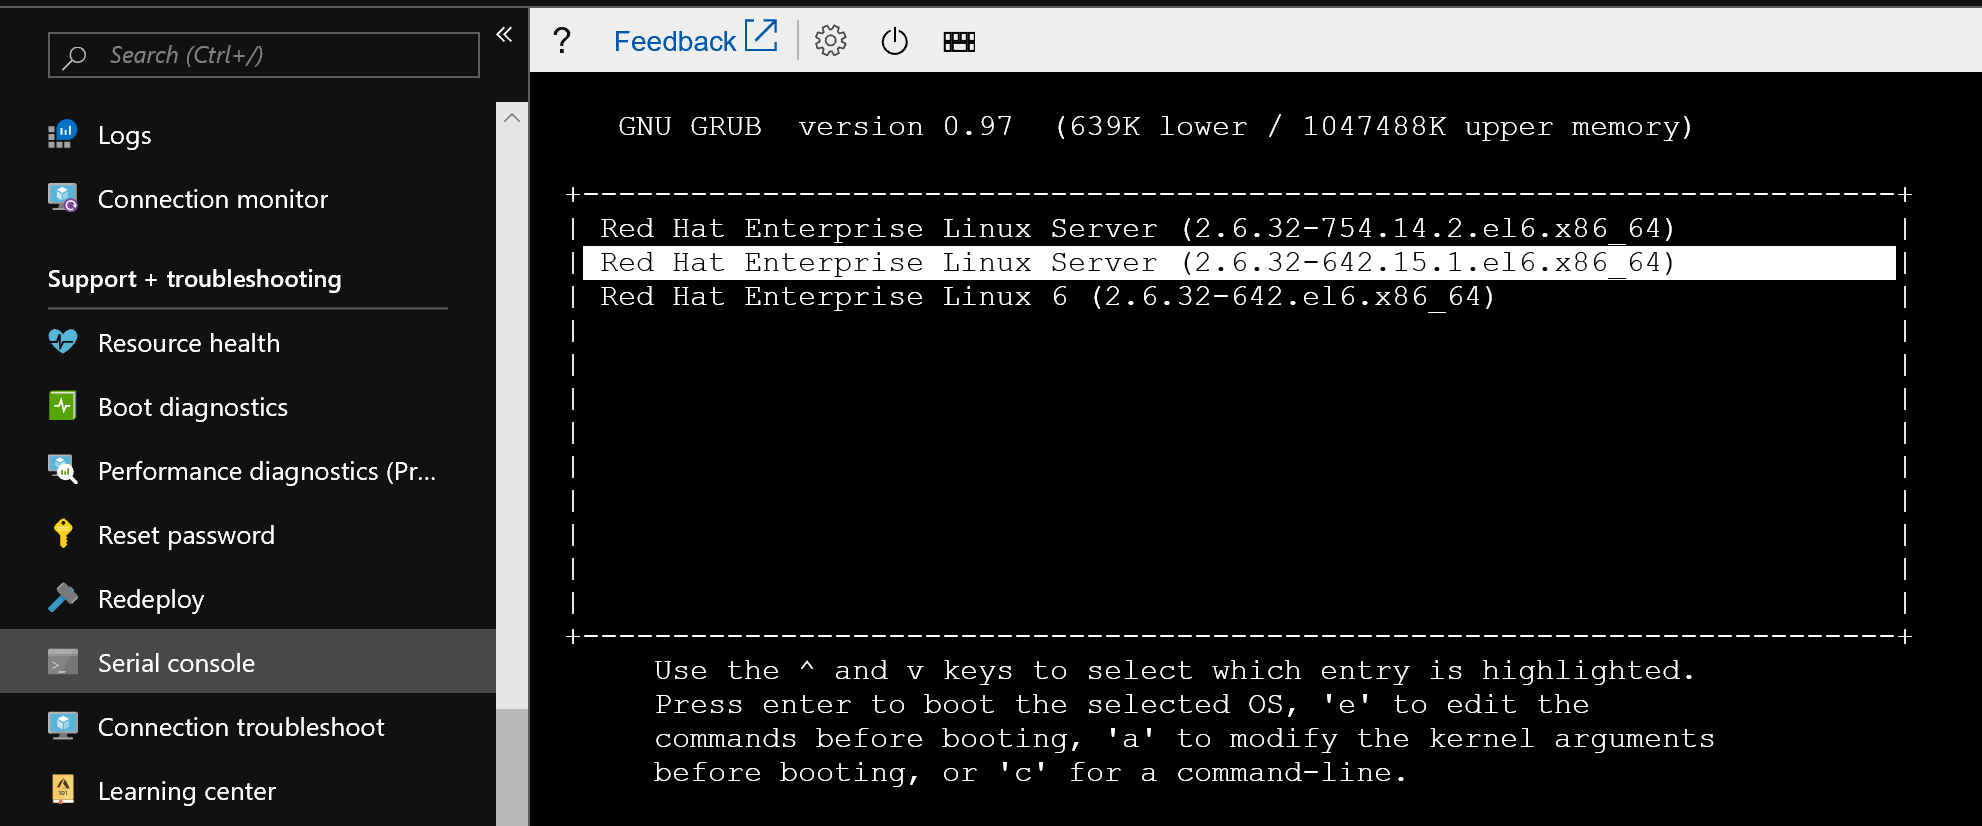 Screenshot of the boot selected OS screen in GRUB, which shows multiple kernels can be chosen.